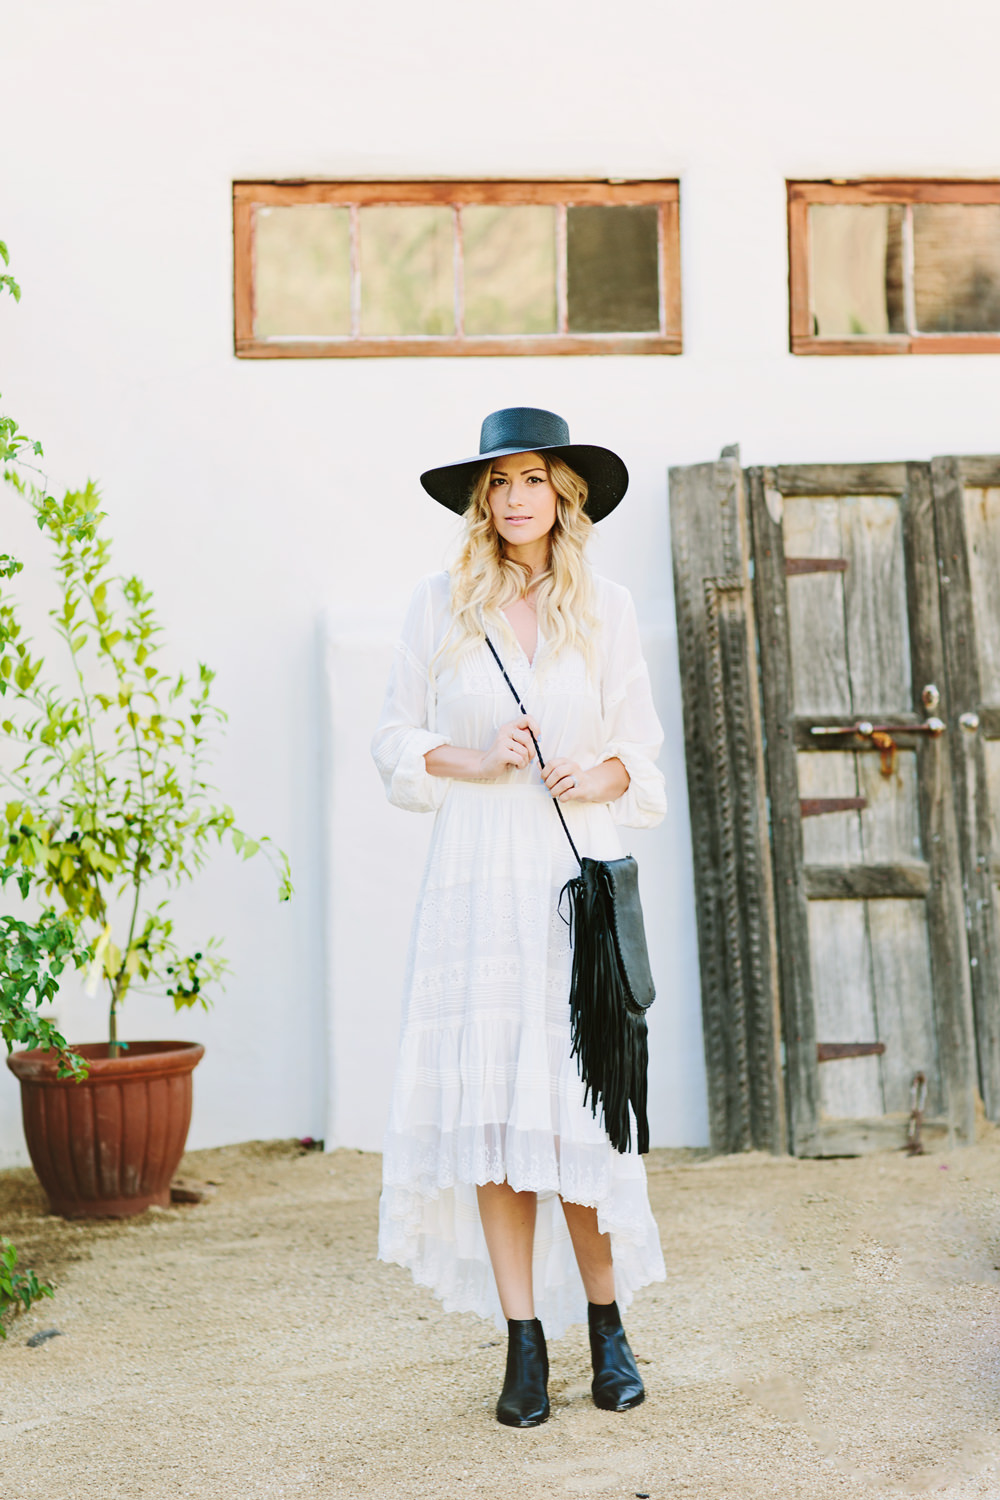 Dash of Darling styles a Spell Designs matching white top and skirt with a Janessa Leone straw boater hat and a Jennifer Haley black fringe bag for a desert bohemian outfit in Palm Springs.